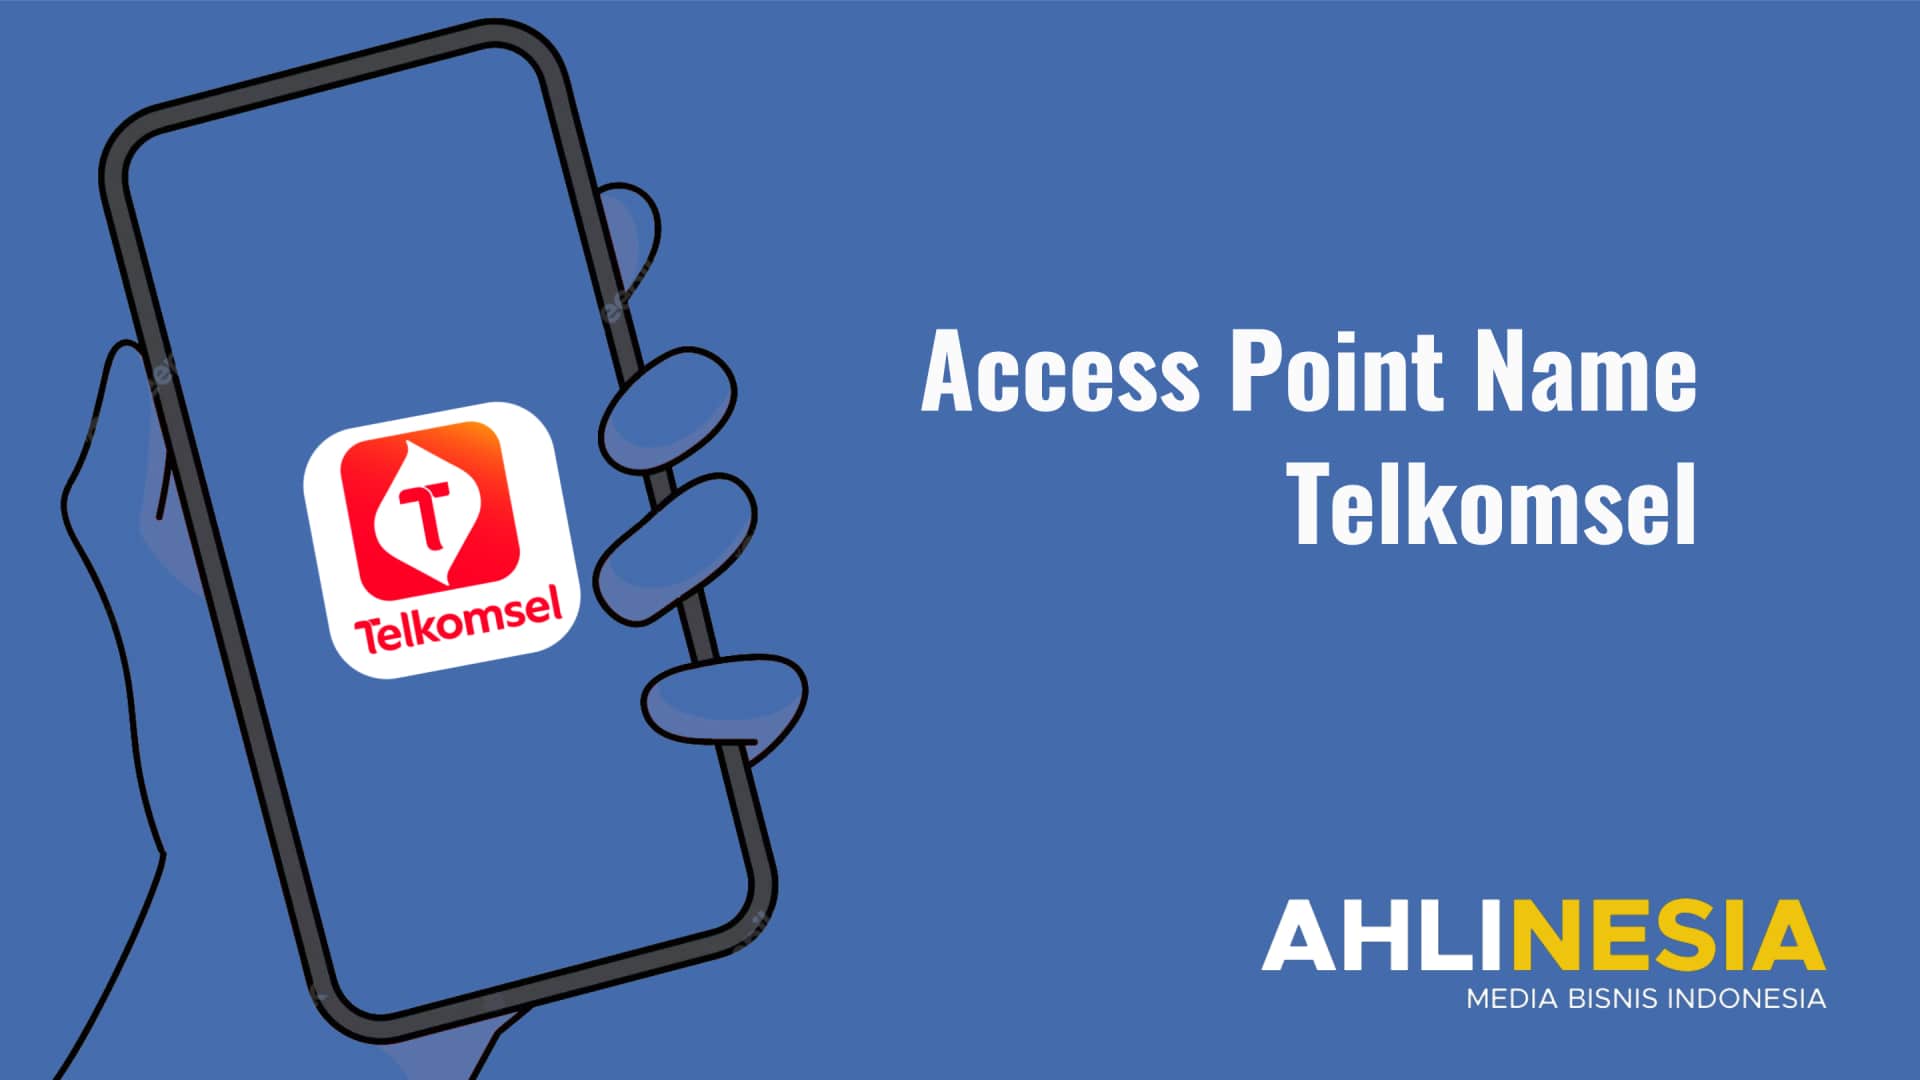 Access Point name Telkomsel